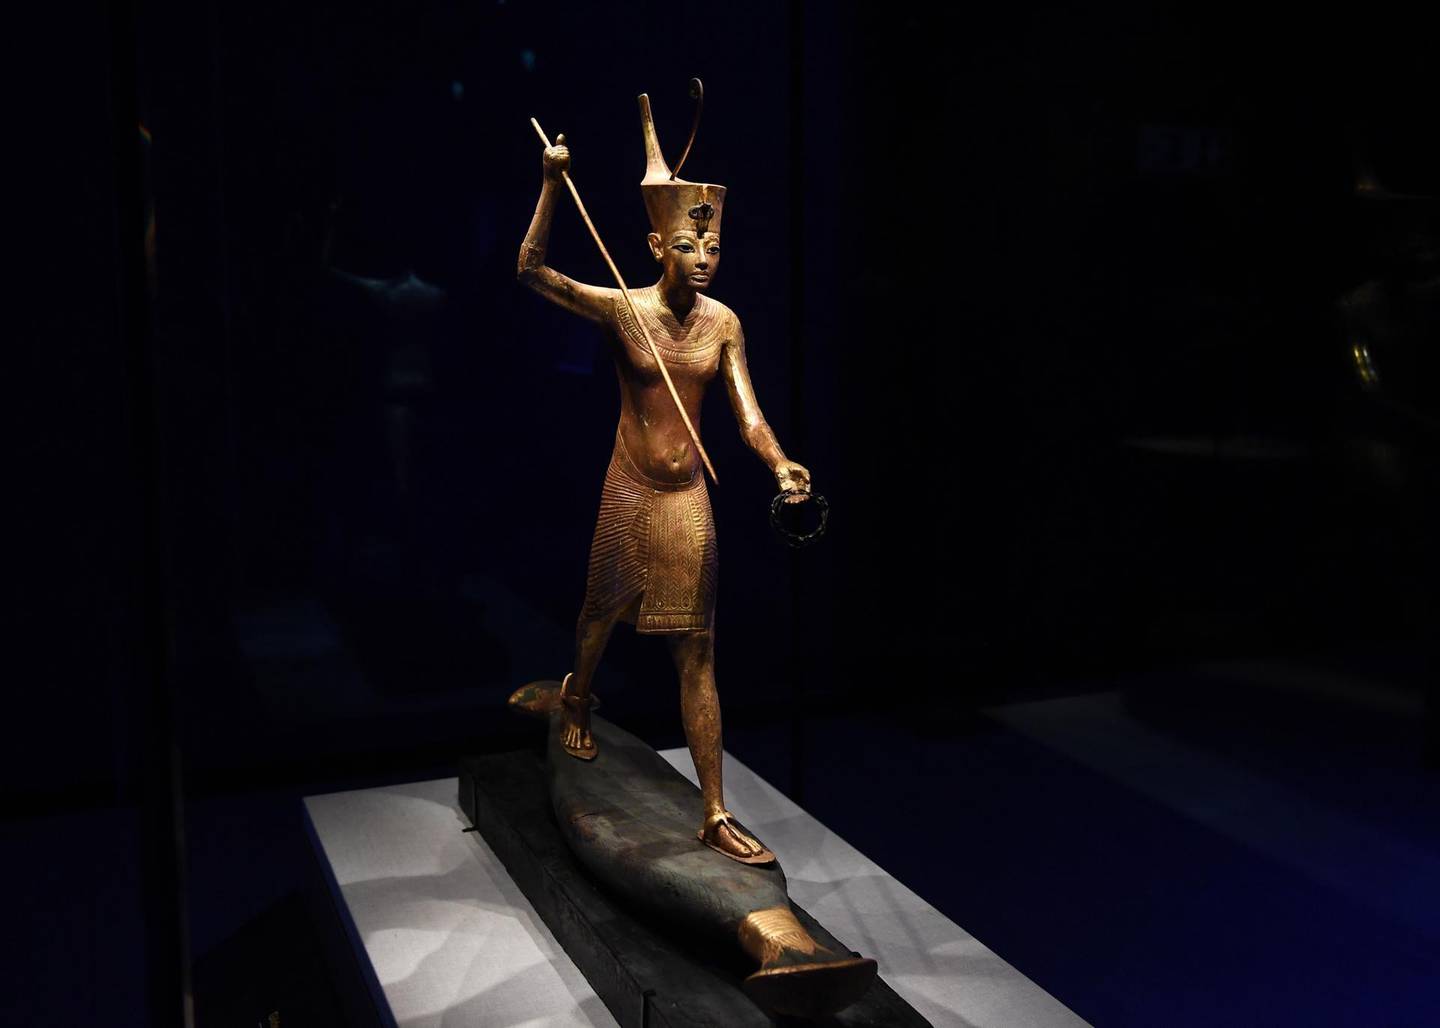 epa07964552 A gilded wooden figure of Tutankhamun throwing a harpoon, dated 1336-1326 BC is seeing during the press preview for the 'Tutankhamun: Treasures of the Golden Phaorah' exhibition at the Saatchi Gallery in Chelsea in London, Britain, 01 November 2019.  EPA/FACUNDO ARRIZABALAGA